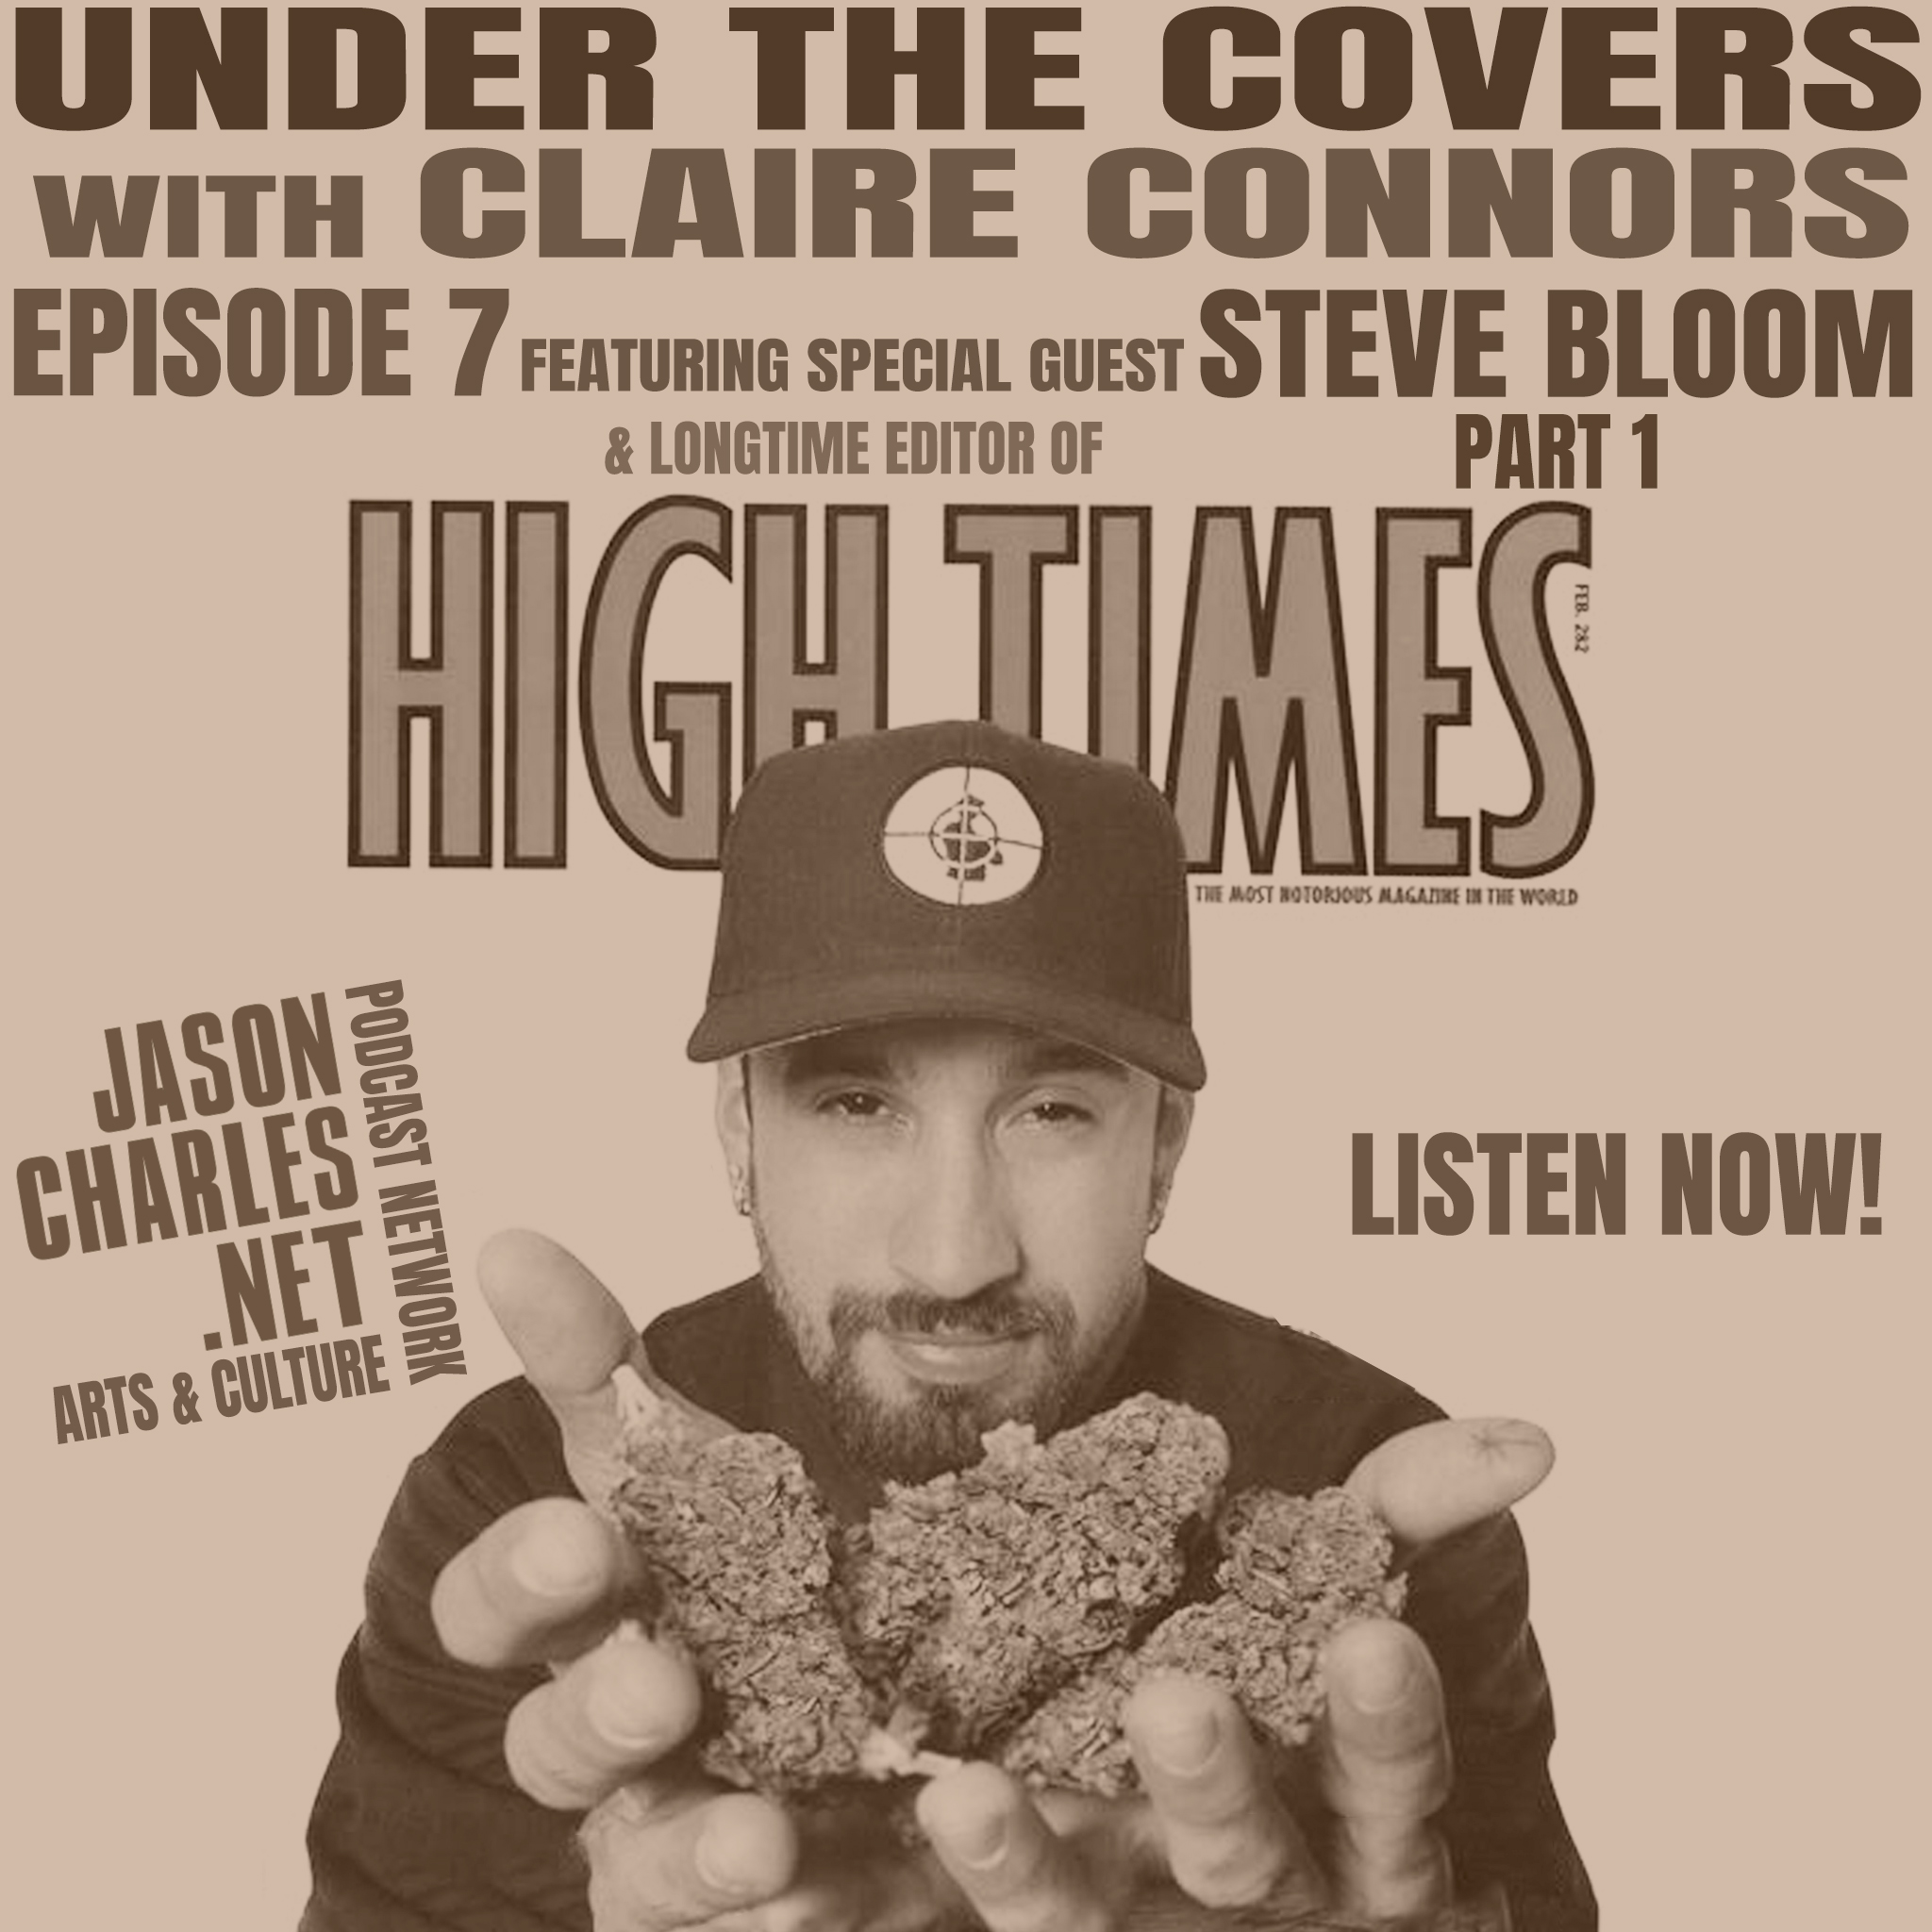 UNDER THE COVERS with Claire Connors Episode 7 Guest Steve Bloom Part 1